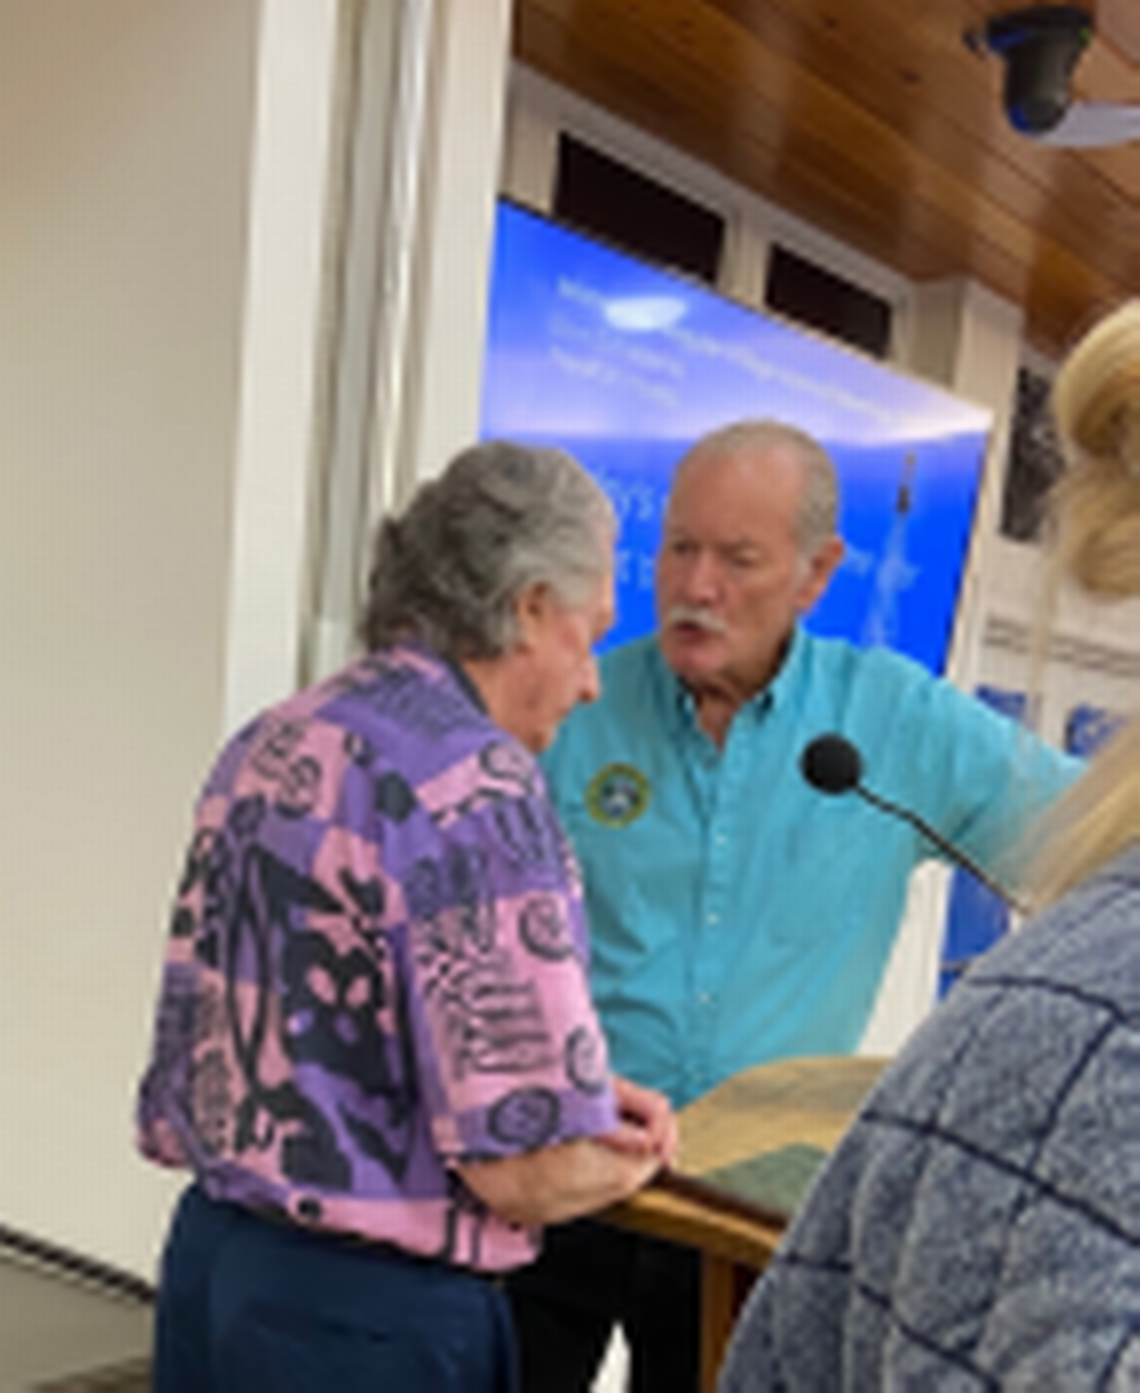 Islamorada Village Councilman David Webb speaks to Vice Mayor Henry Rosenthal while on break during a Thursday, Aug. 25, 2022, meeting where a vote was taken to increase annual garbage collection assessments.